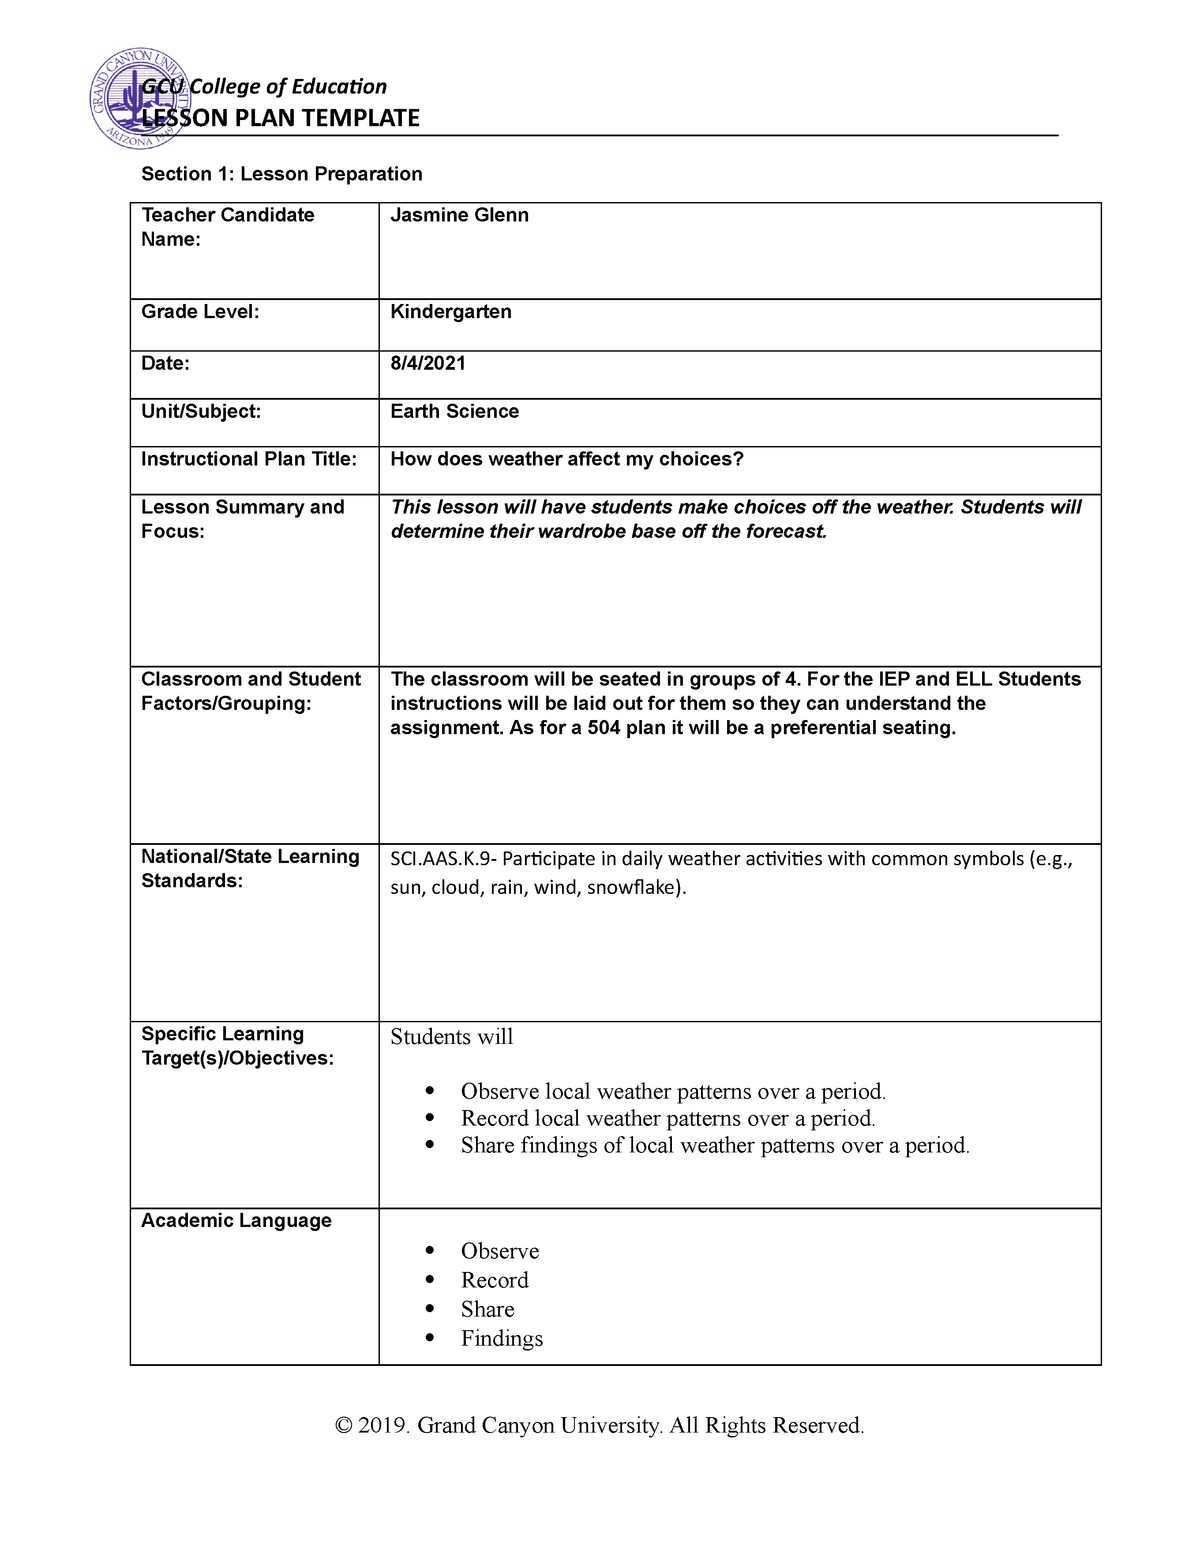 coe-lesson-plan-template-1-lesson-plan-template-section-1-lesson